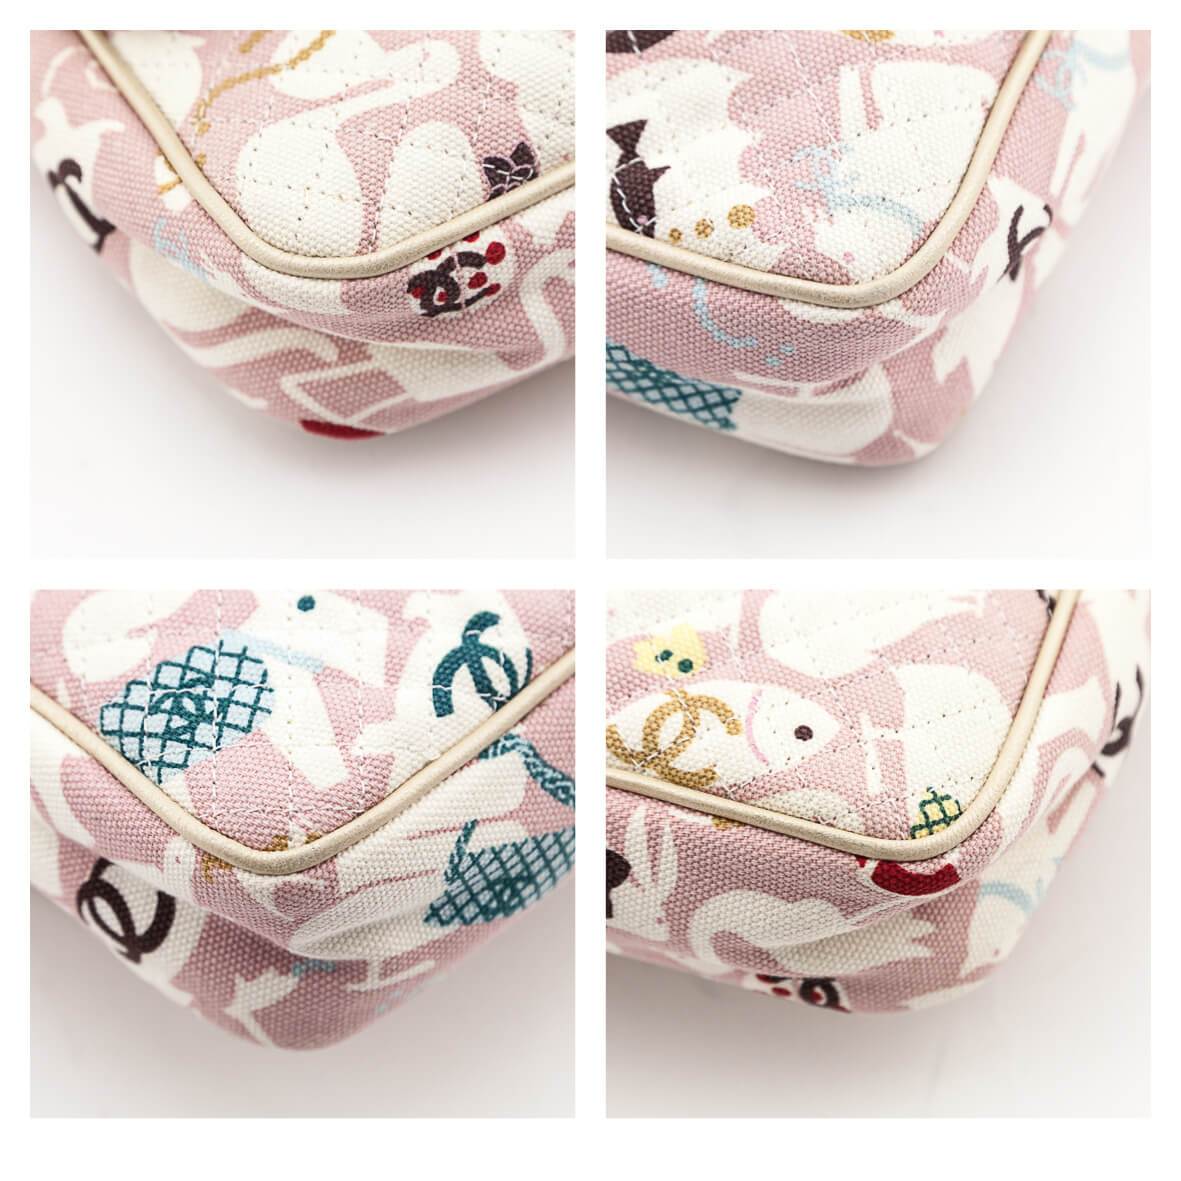 Chanel Terry Baby Animals Diaper Bag - Pink - CHA206476